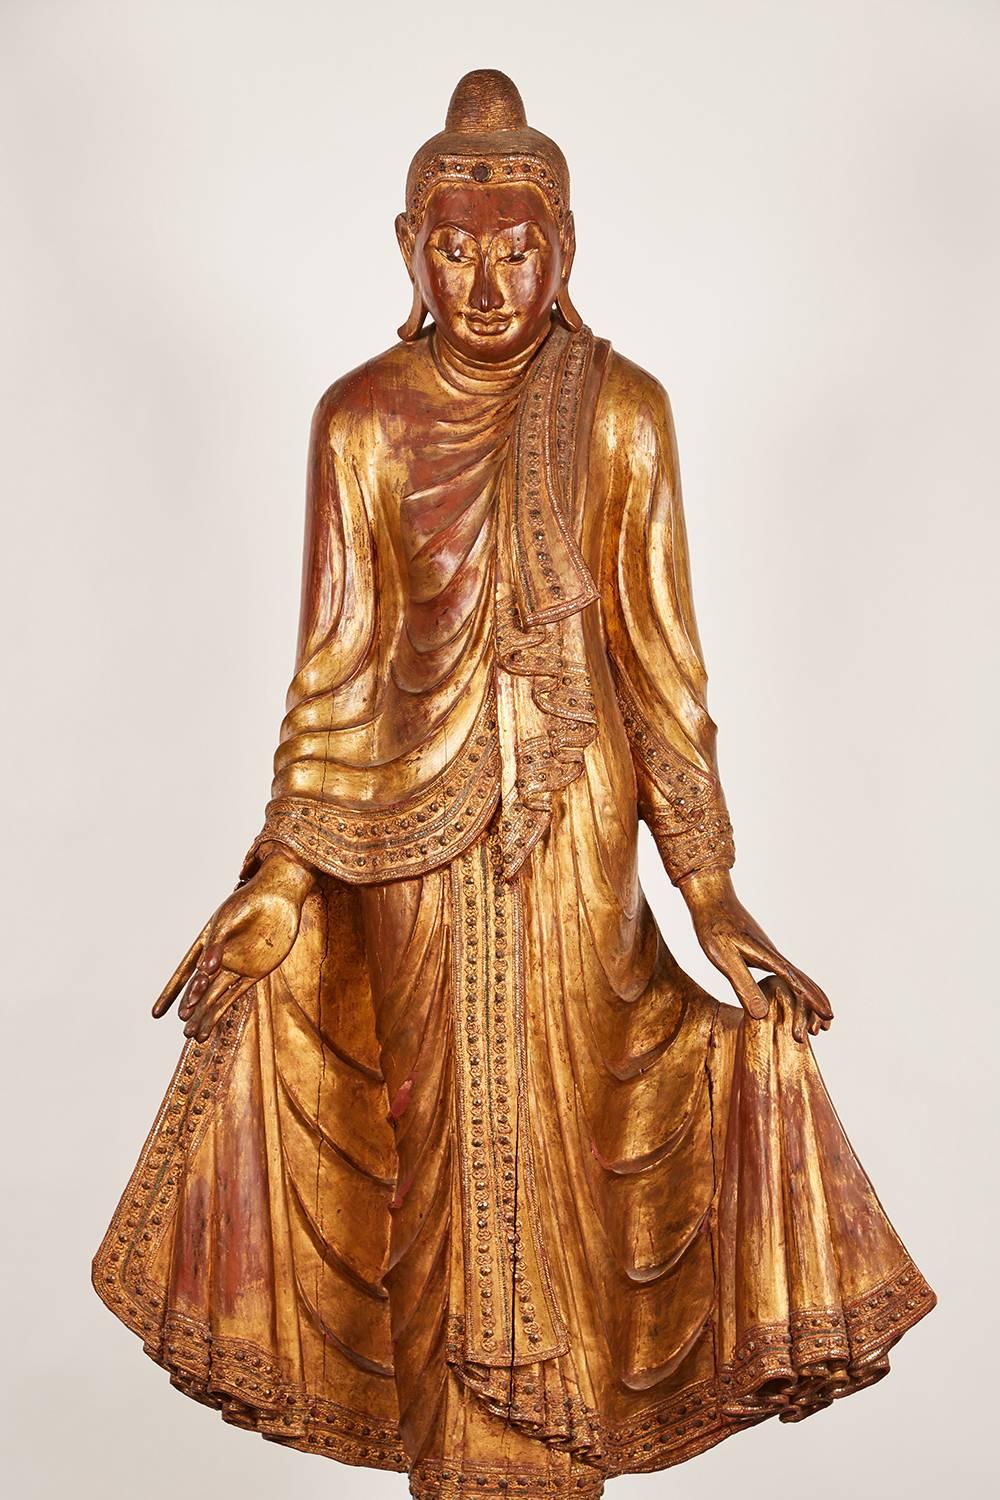 A very large gold Thai standing Buddha featuring intricate inset glass detailing. Supported by a later custom wooden stand